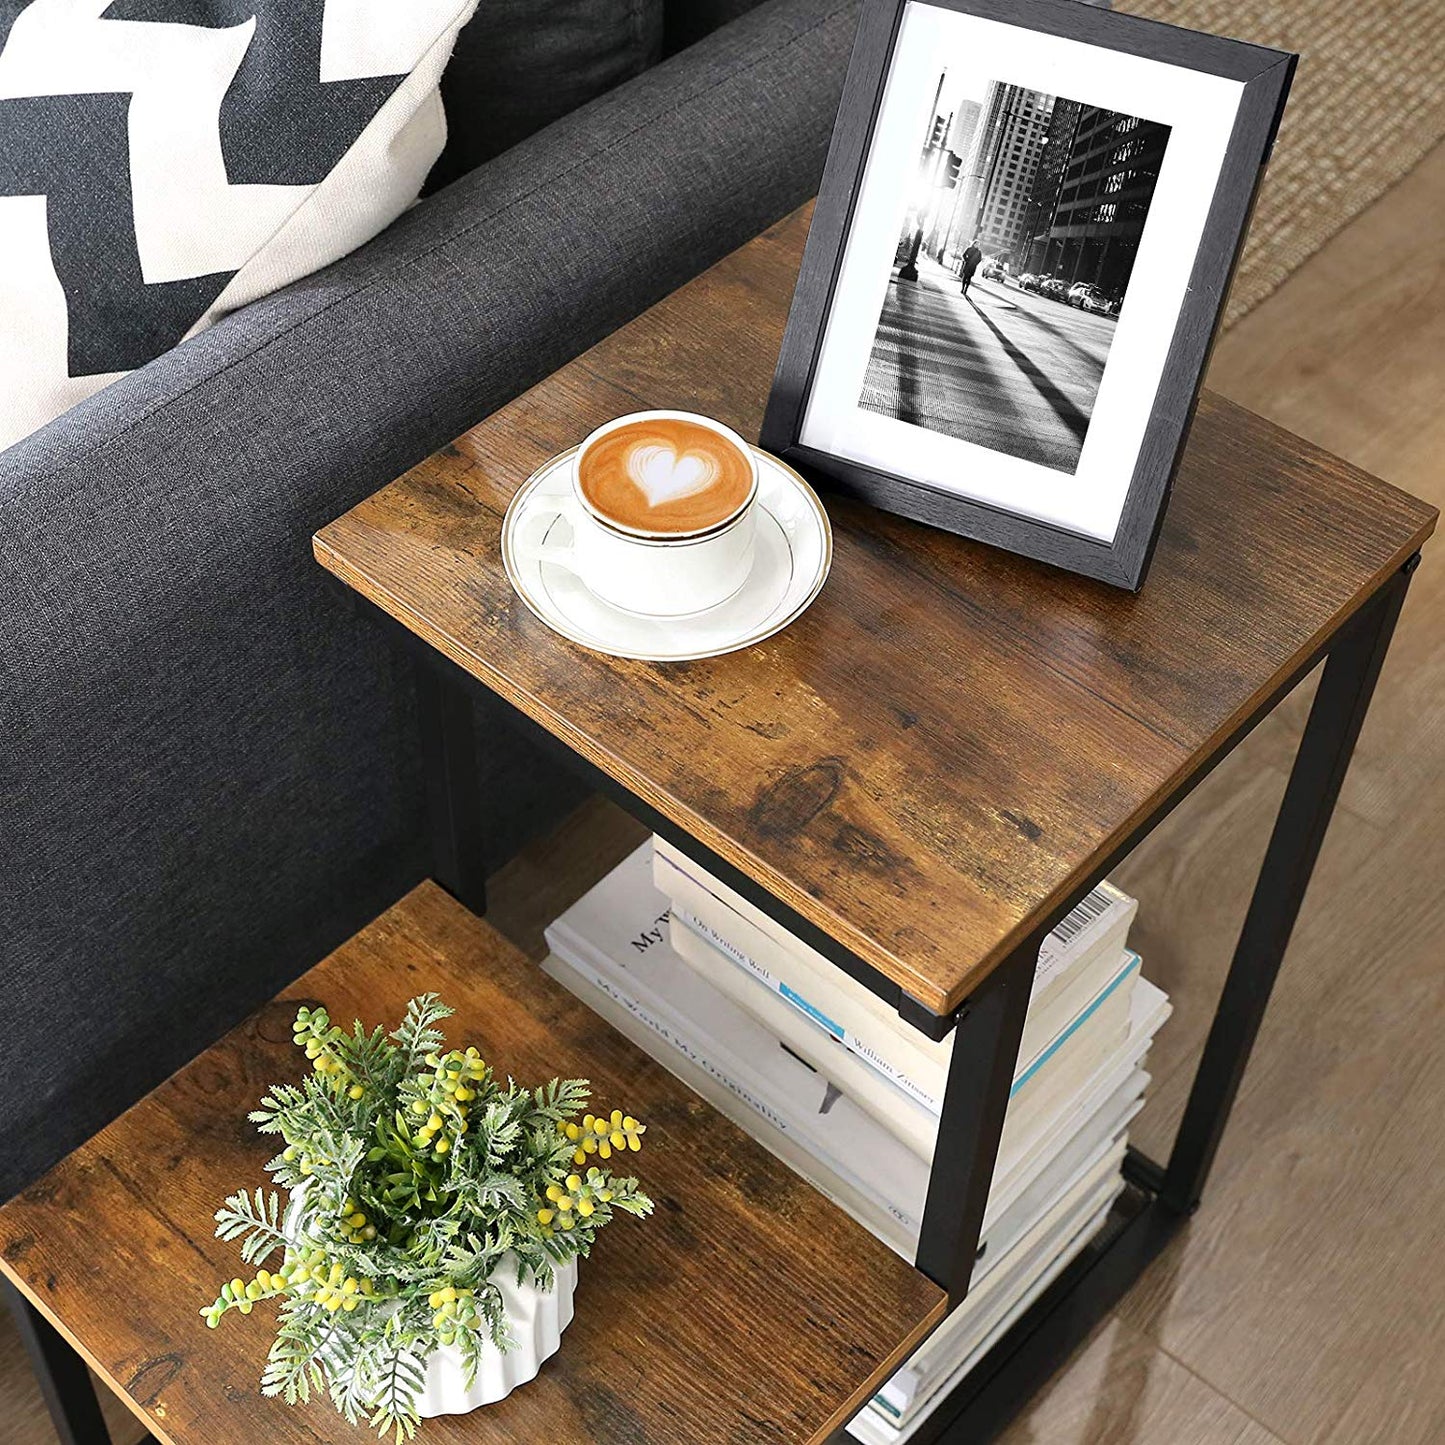 Double Surfaces Side Table